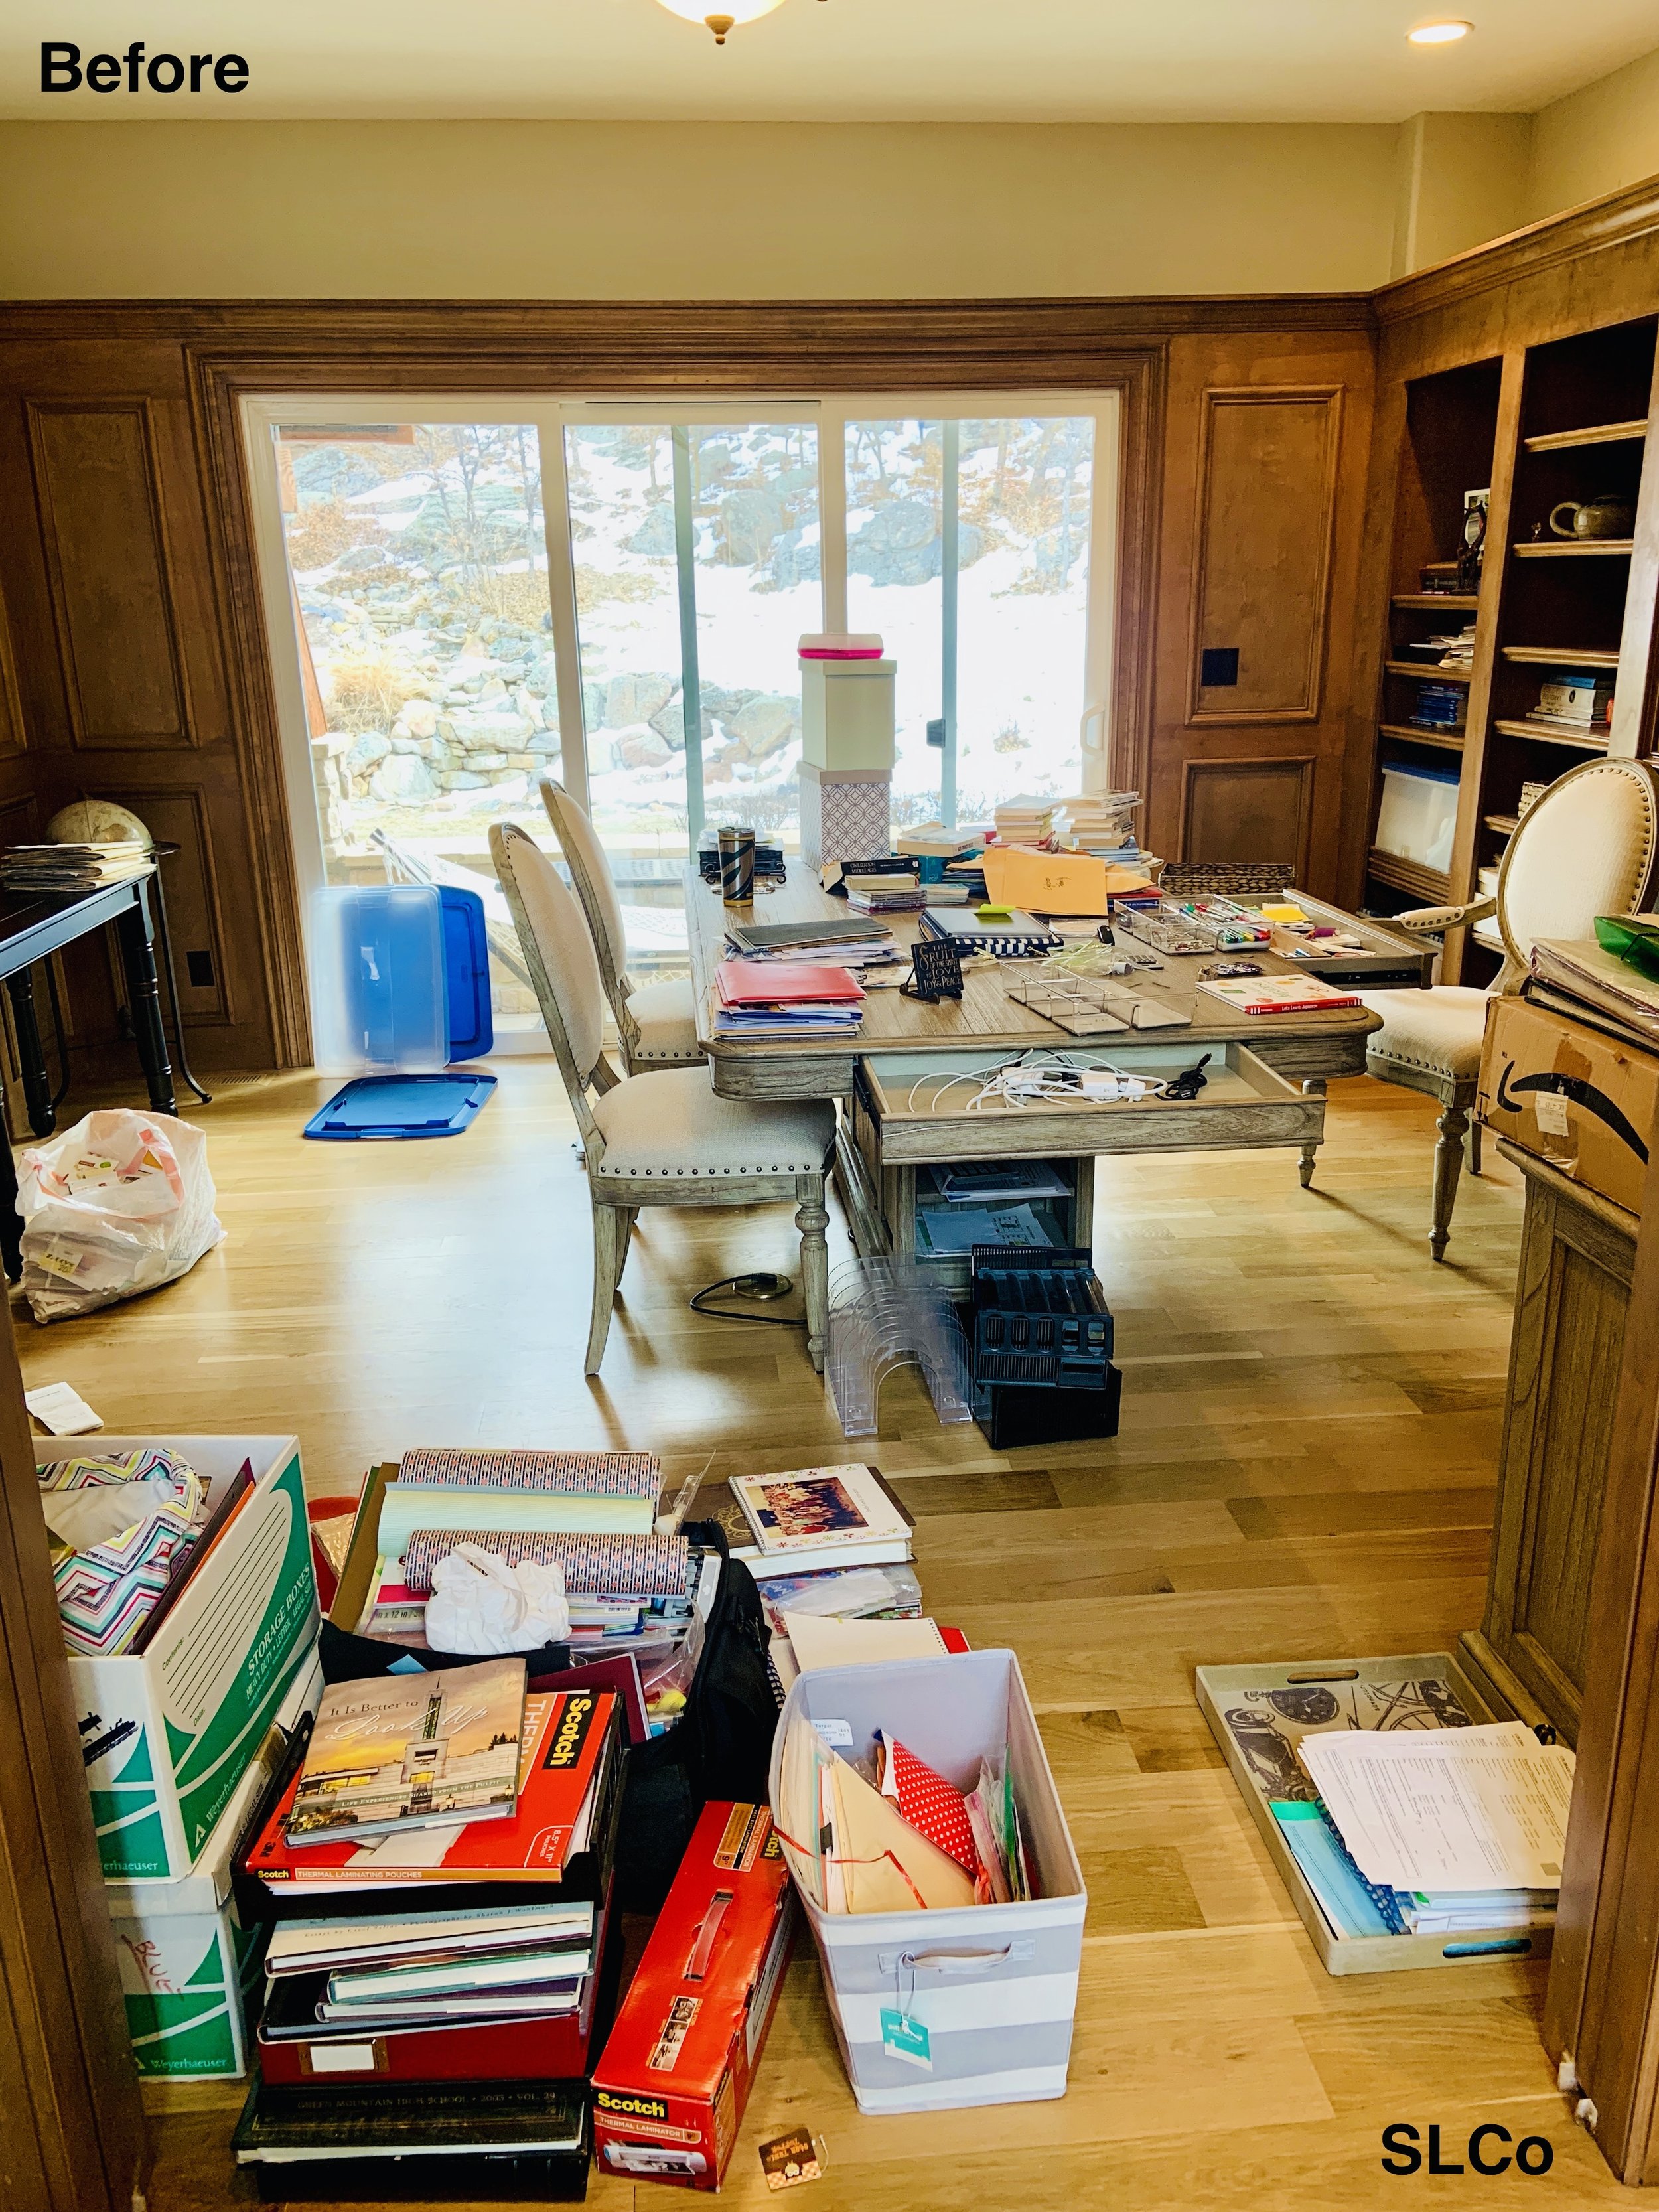 Before image of home office with stacks of books on the floor and desk cluttered and filled with items.